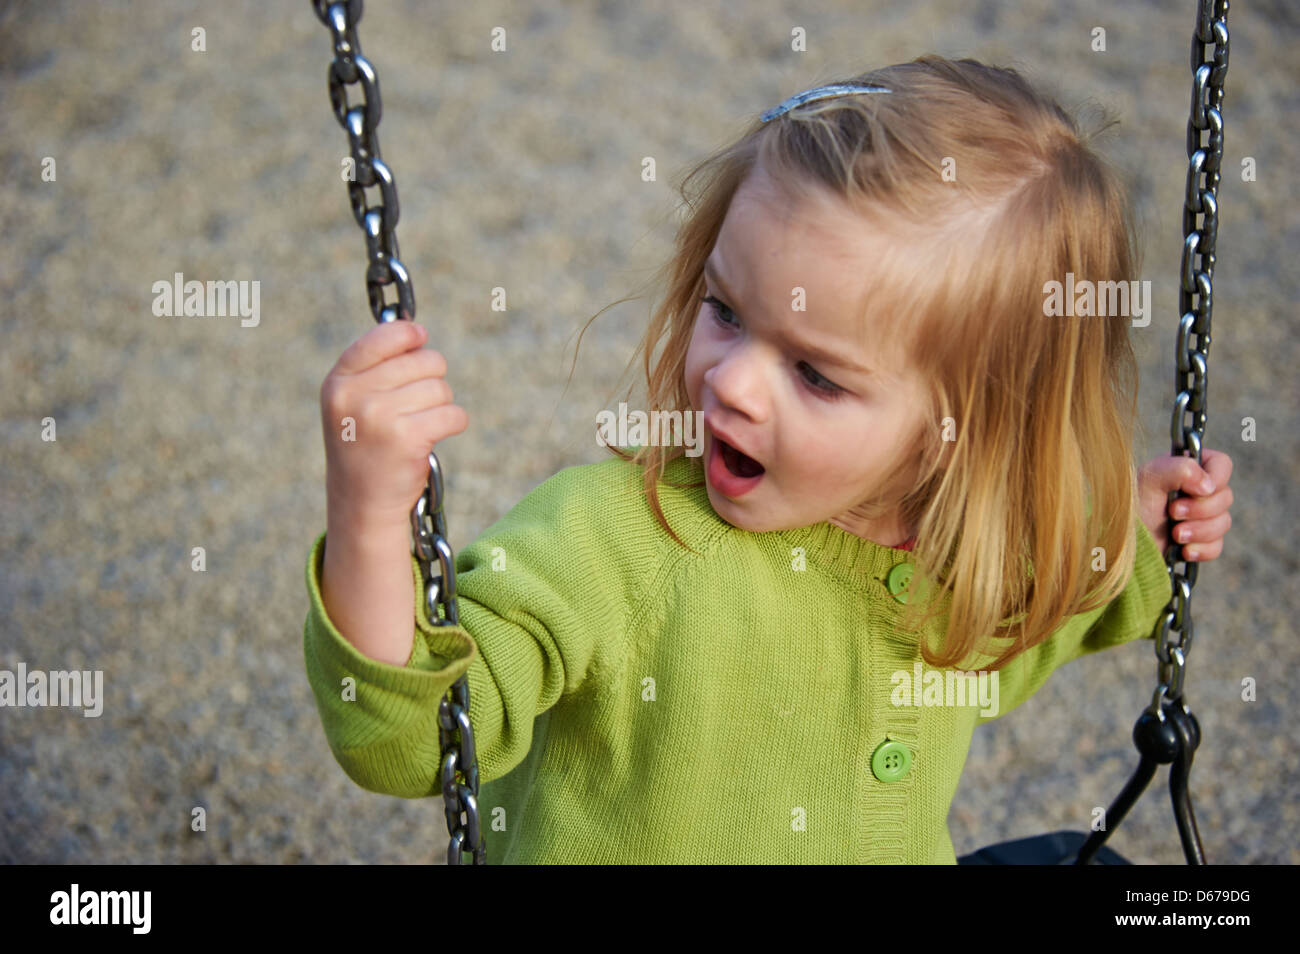 Baby child toddler blond girl on the swing - seesaw Stock Photo